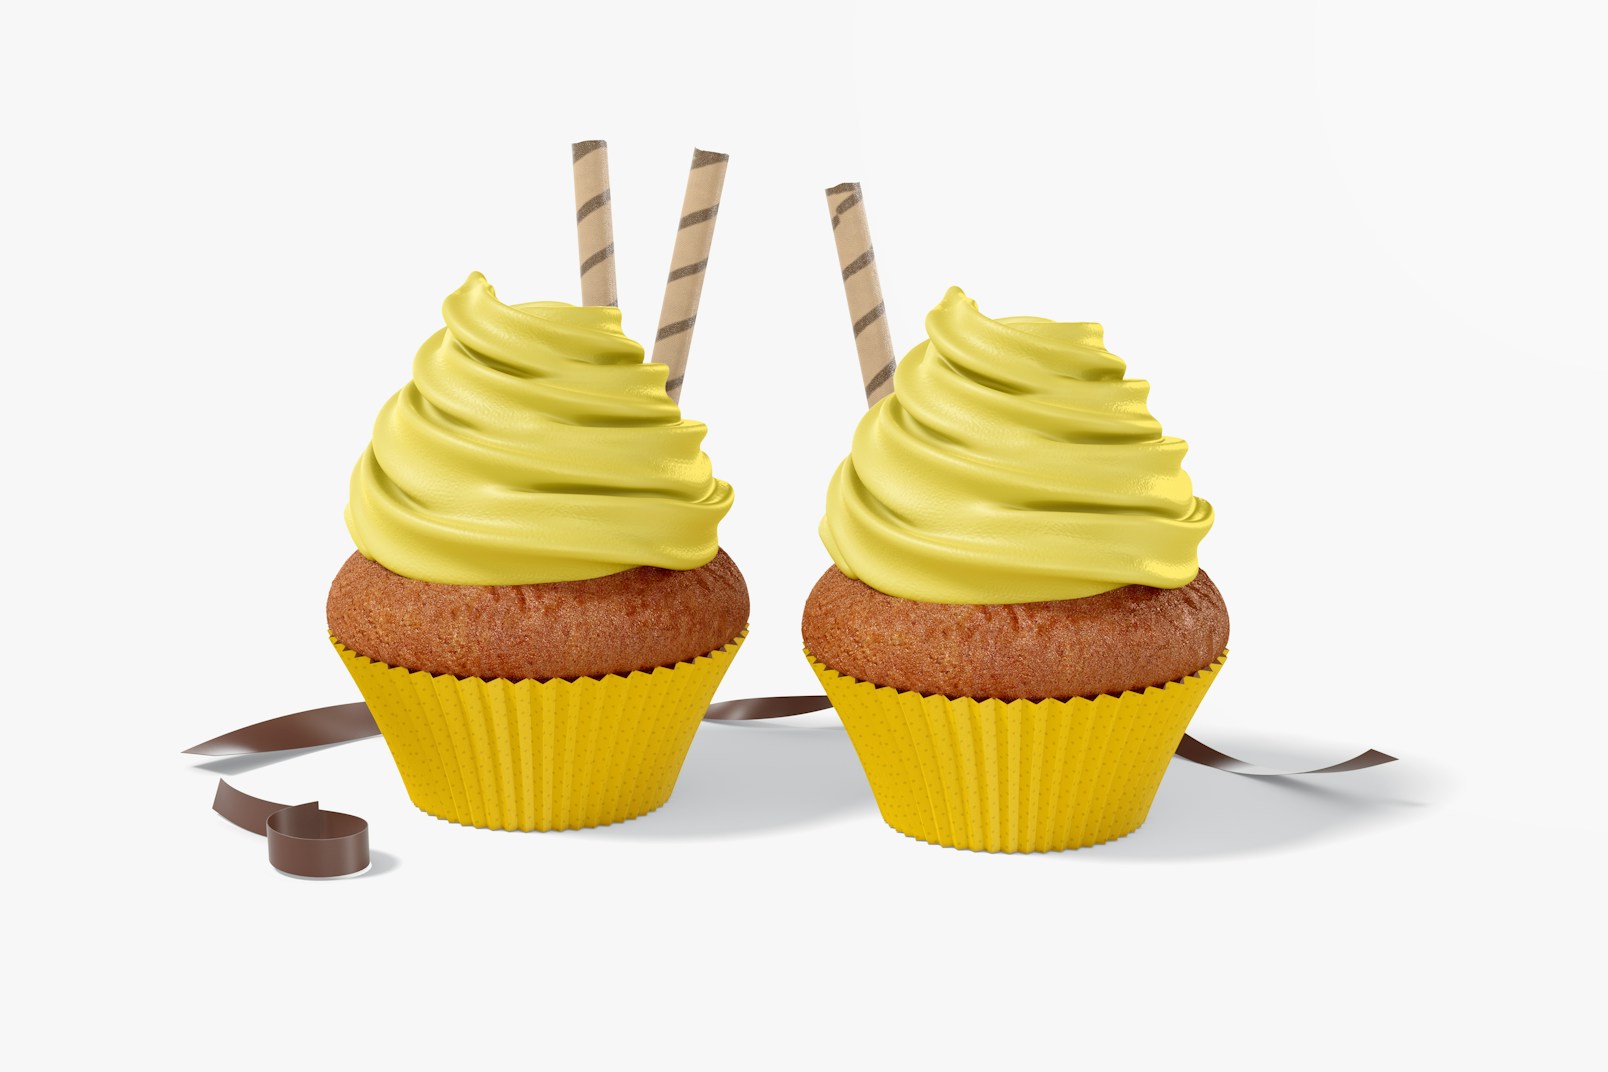 Cupcakes with Paper Baking Cup Mockup, Front View